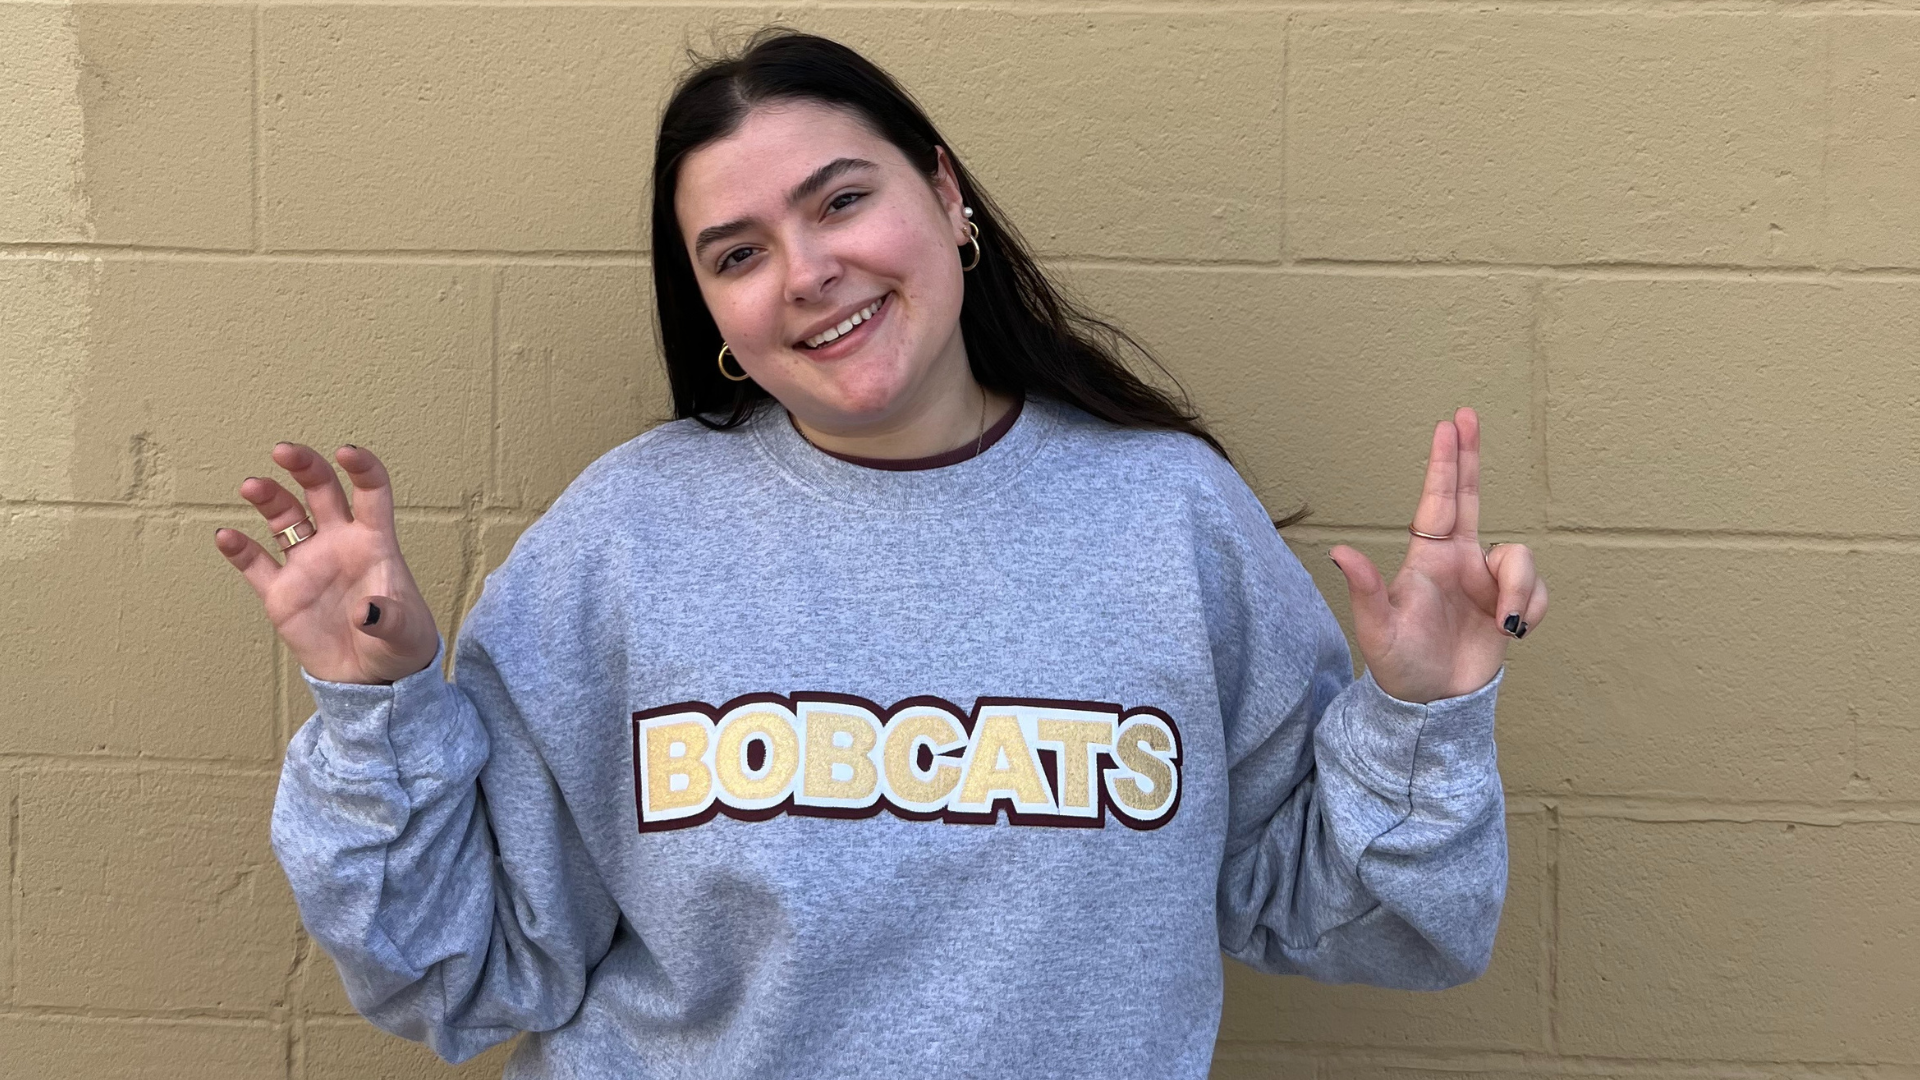 Classic Grey "BOBCATS" Sweatshirt with Block Gold on White on Maroon Stitch Lettering